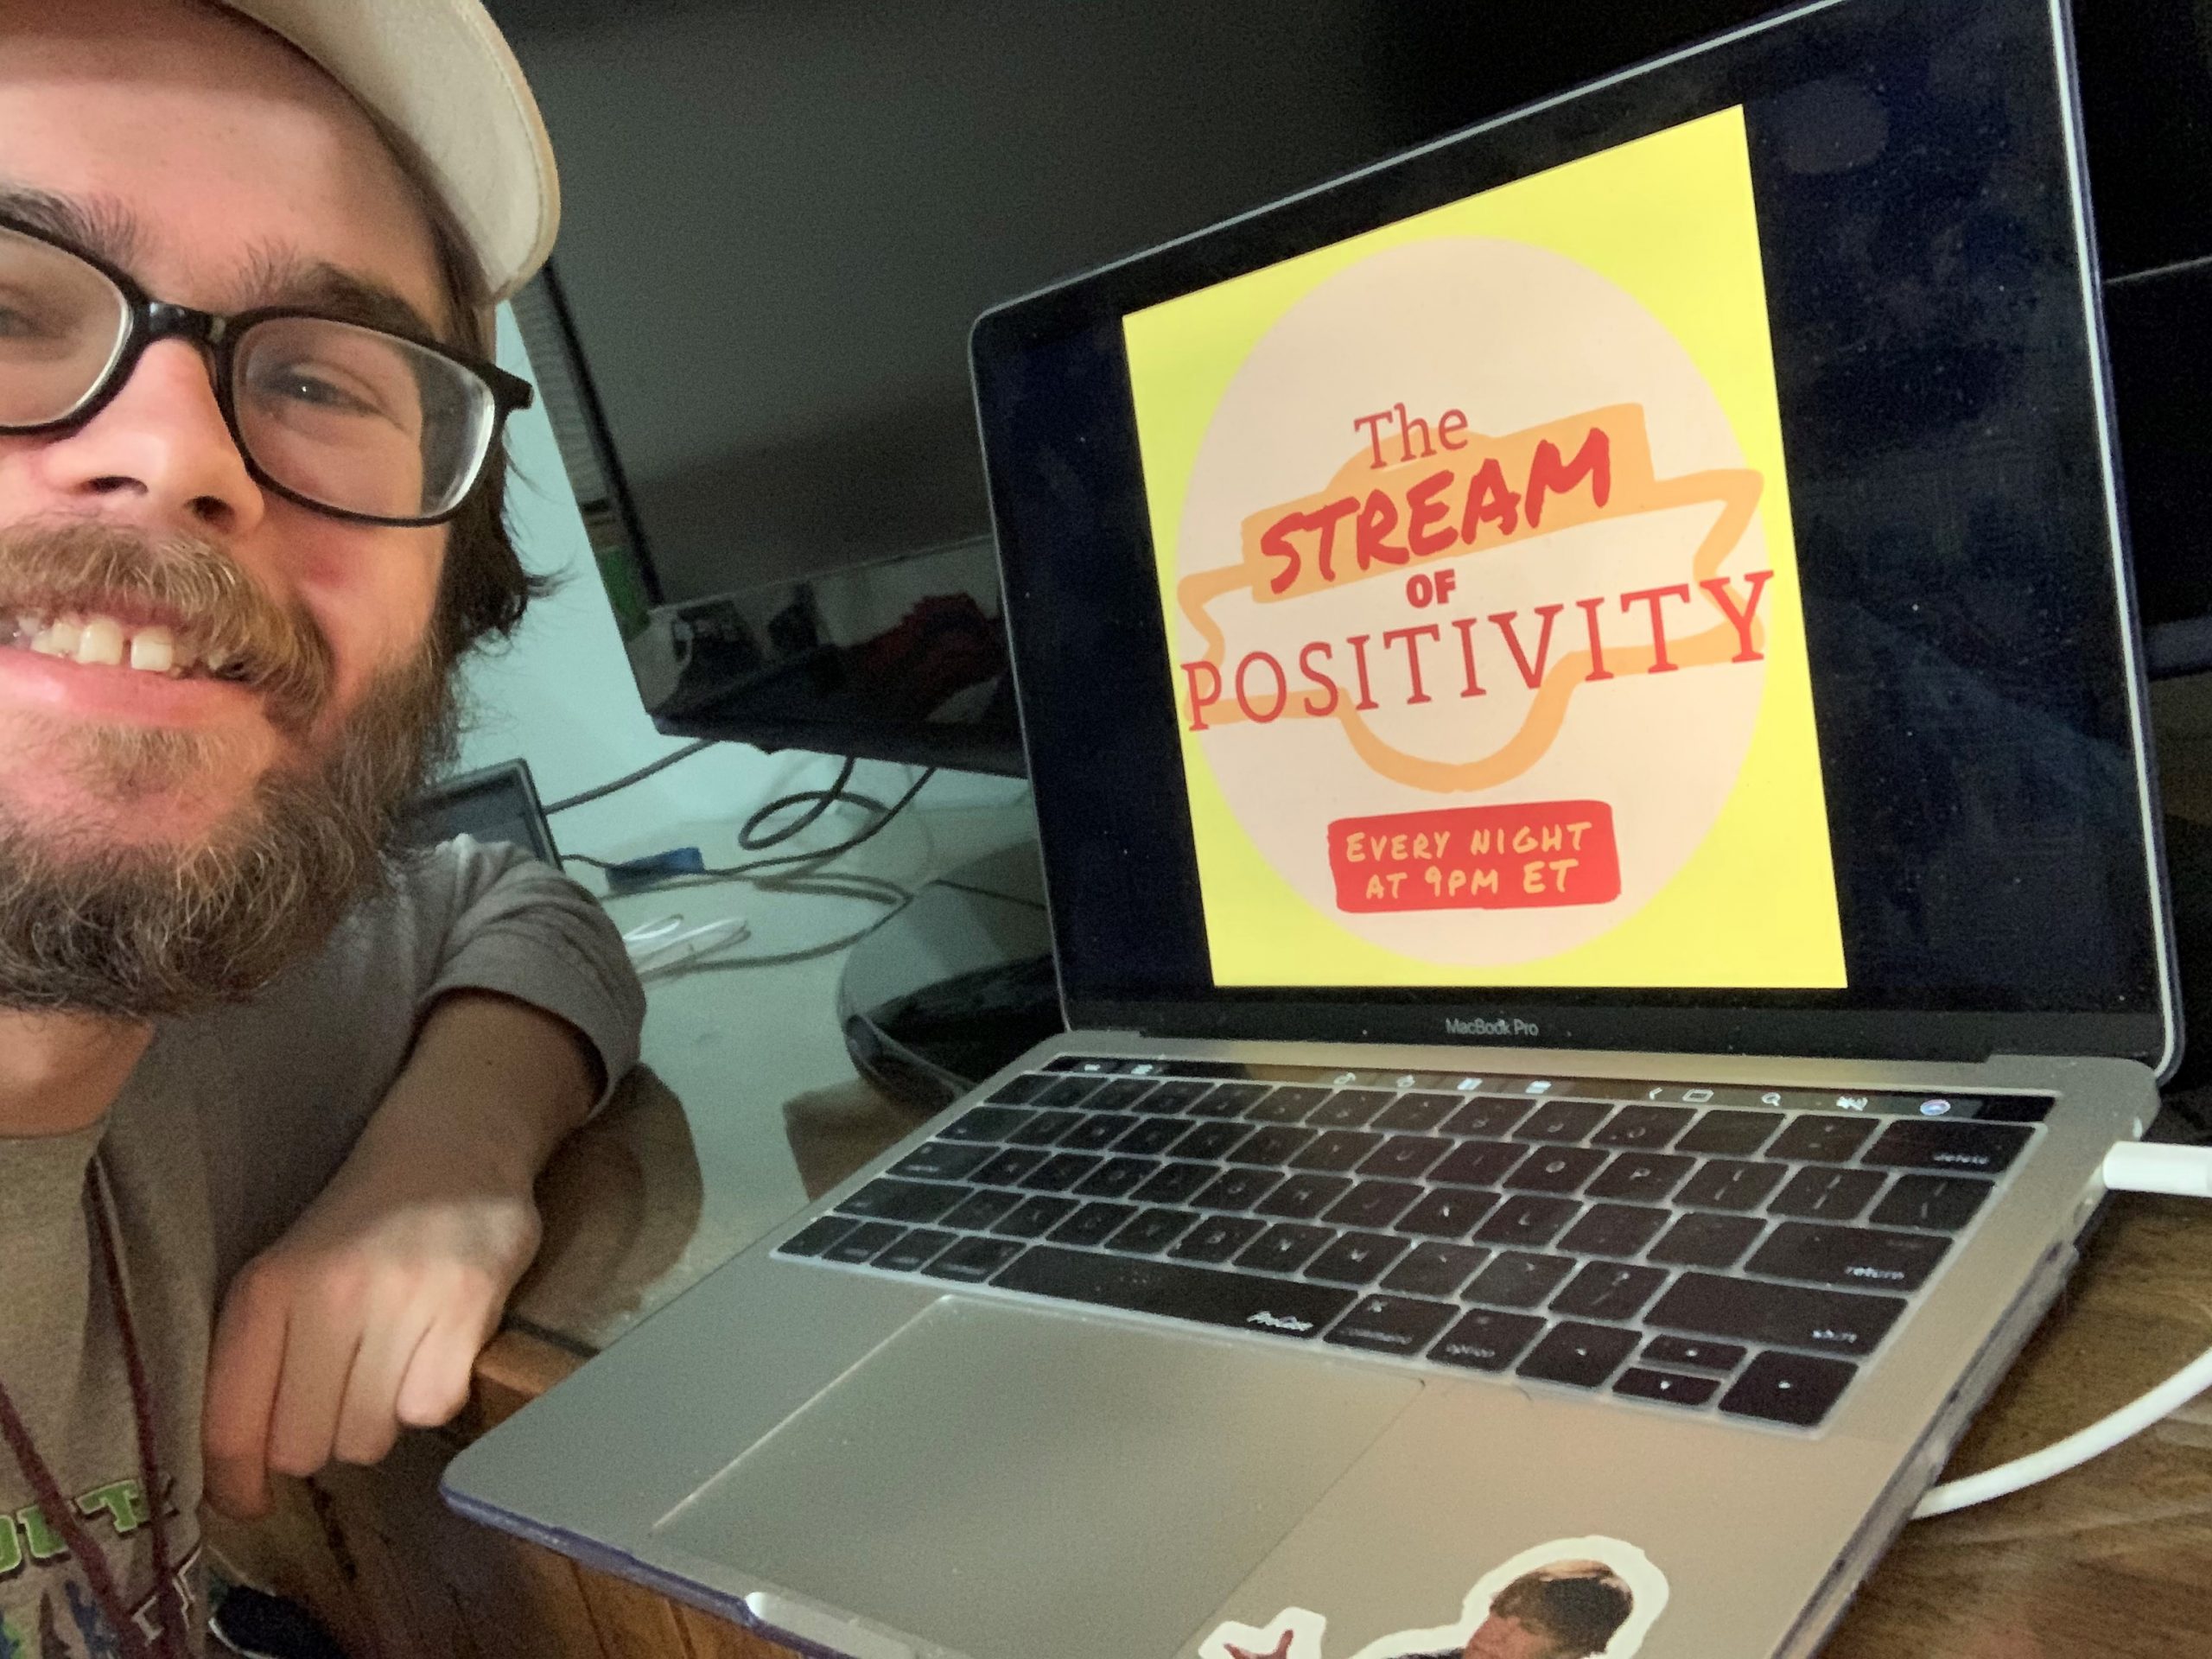 Matthew Wood sits in front of his computer at home, where the words "The Stream of Positivity" are up on the screen.